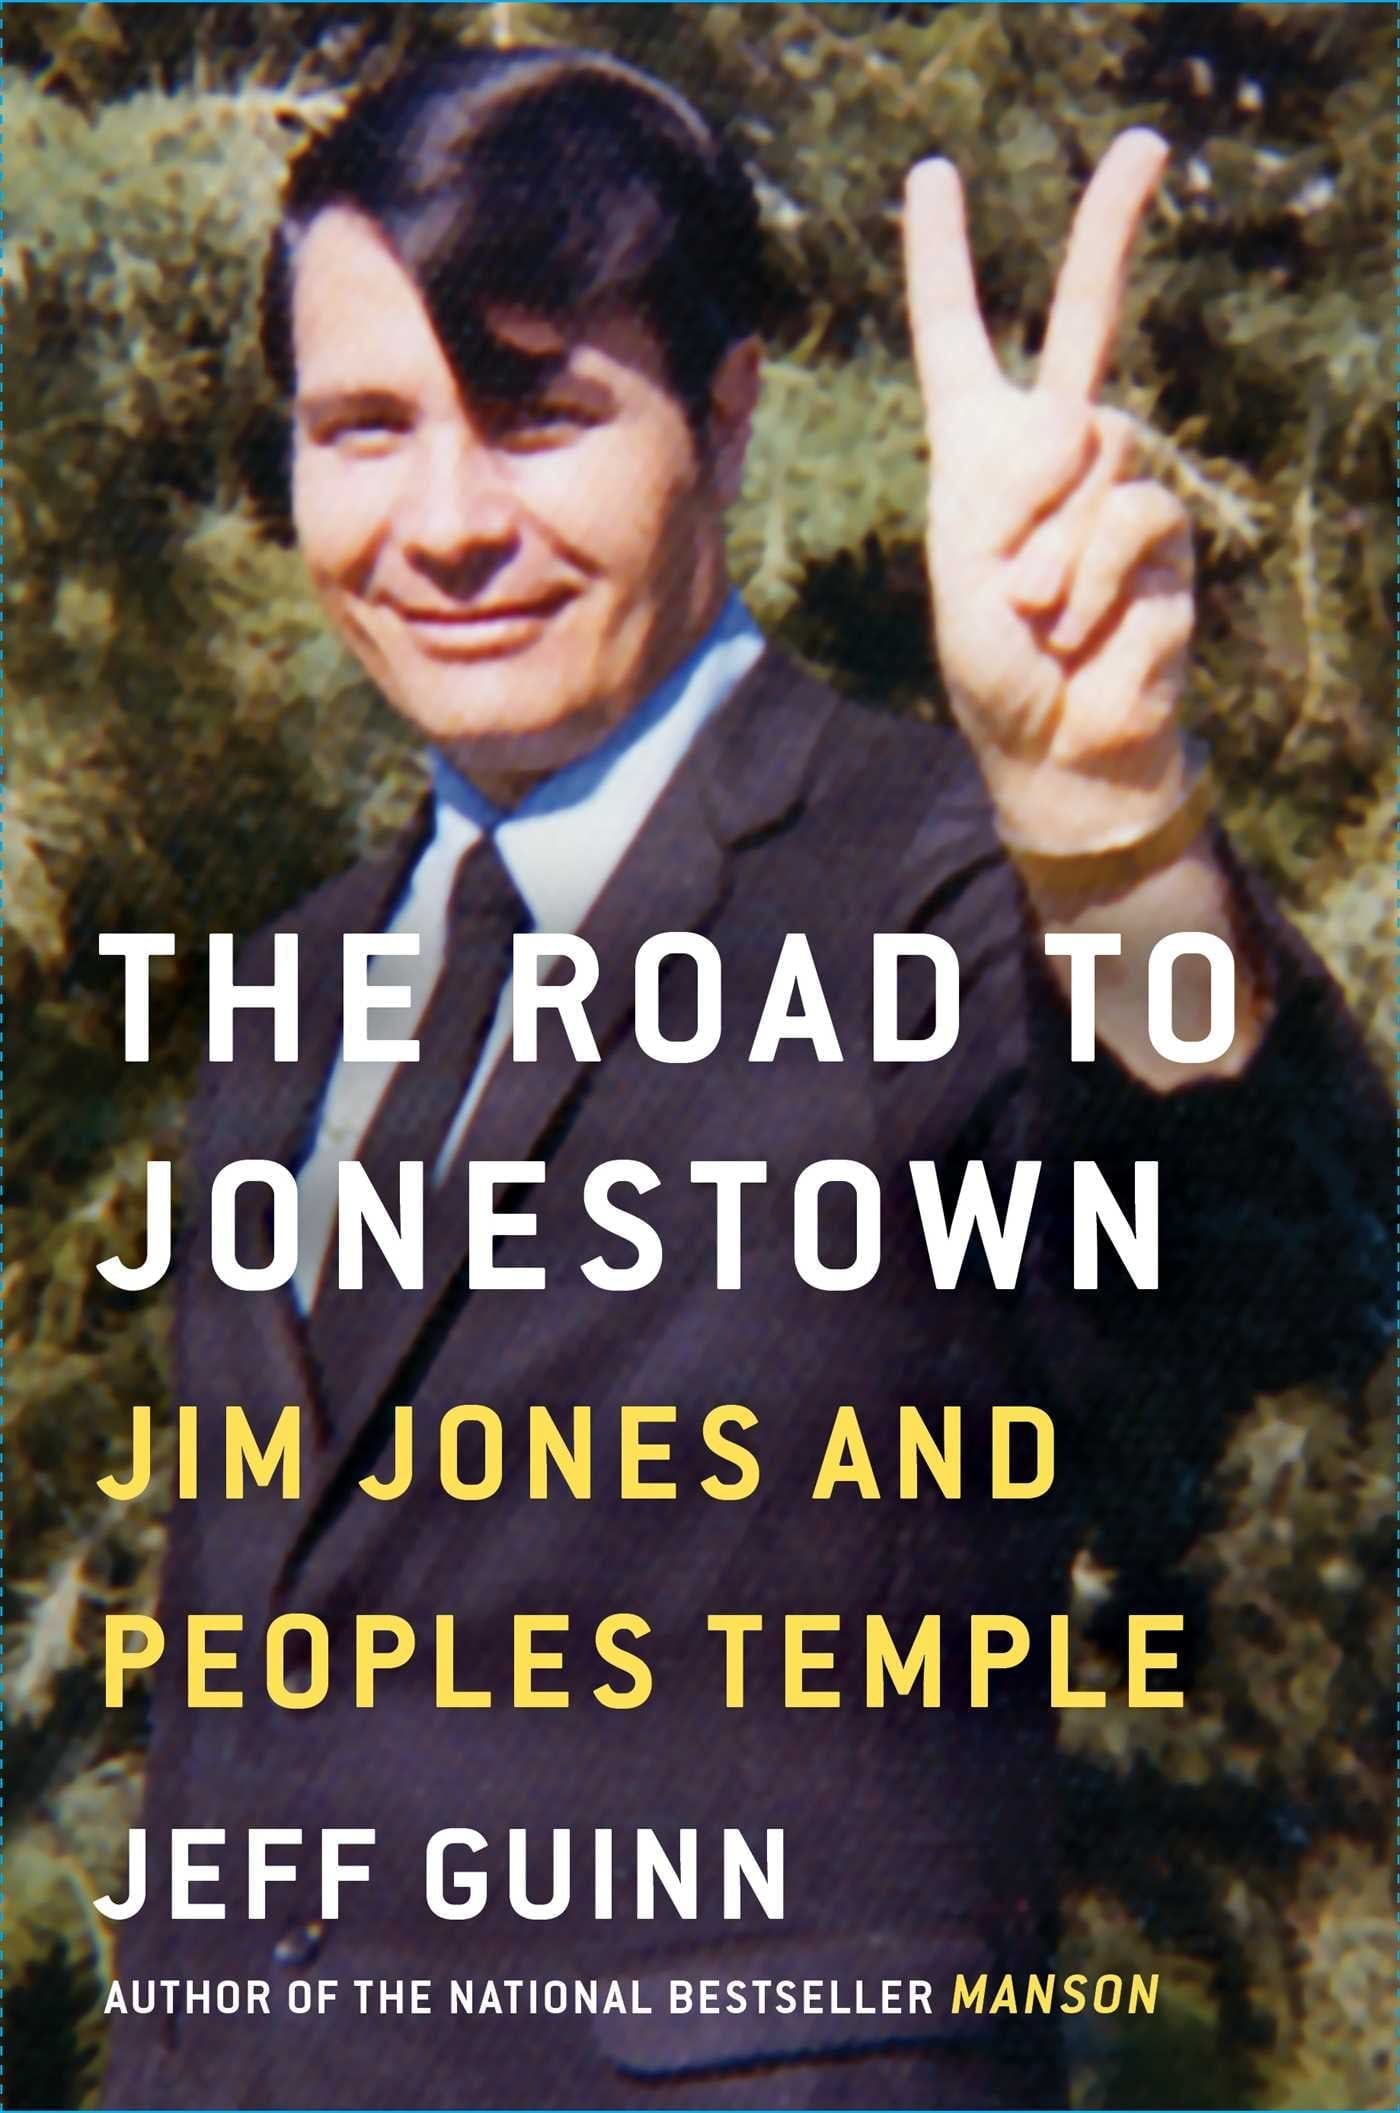 The Road to Jonestown: Jim Jones and the People’s Temple by Jeff Guinn